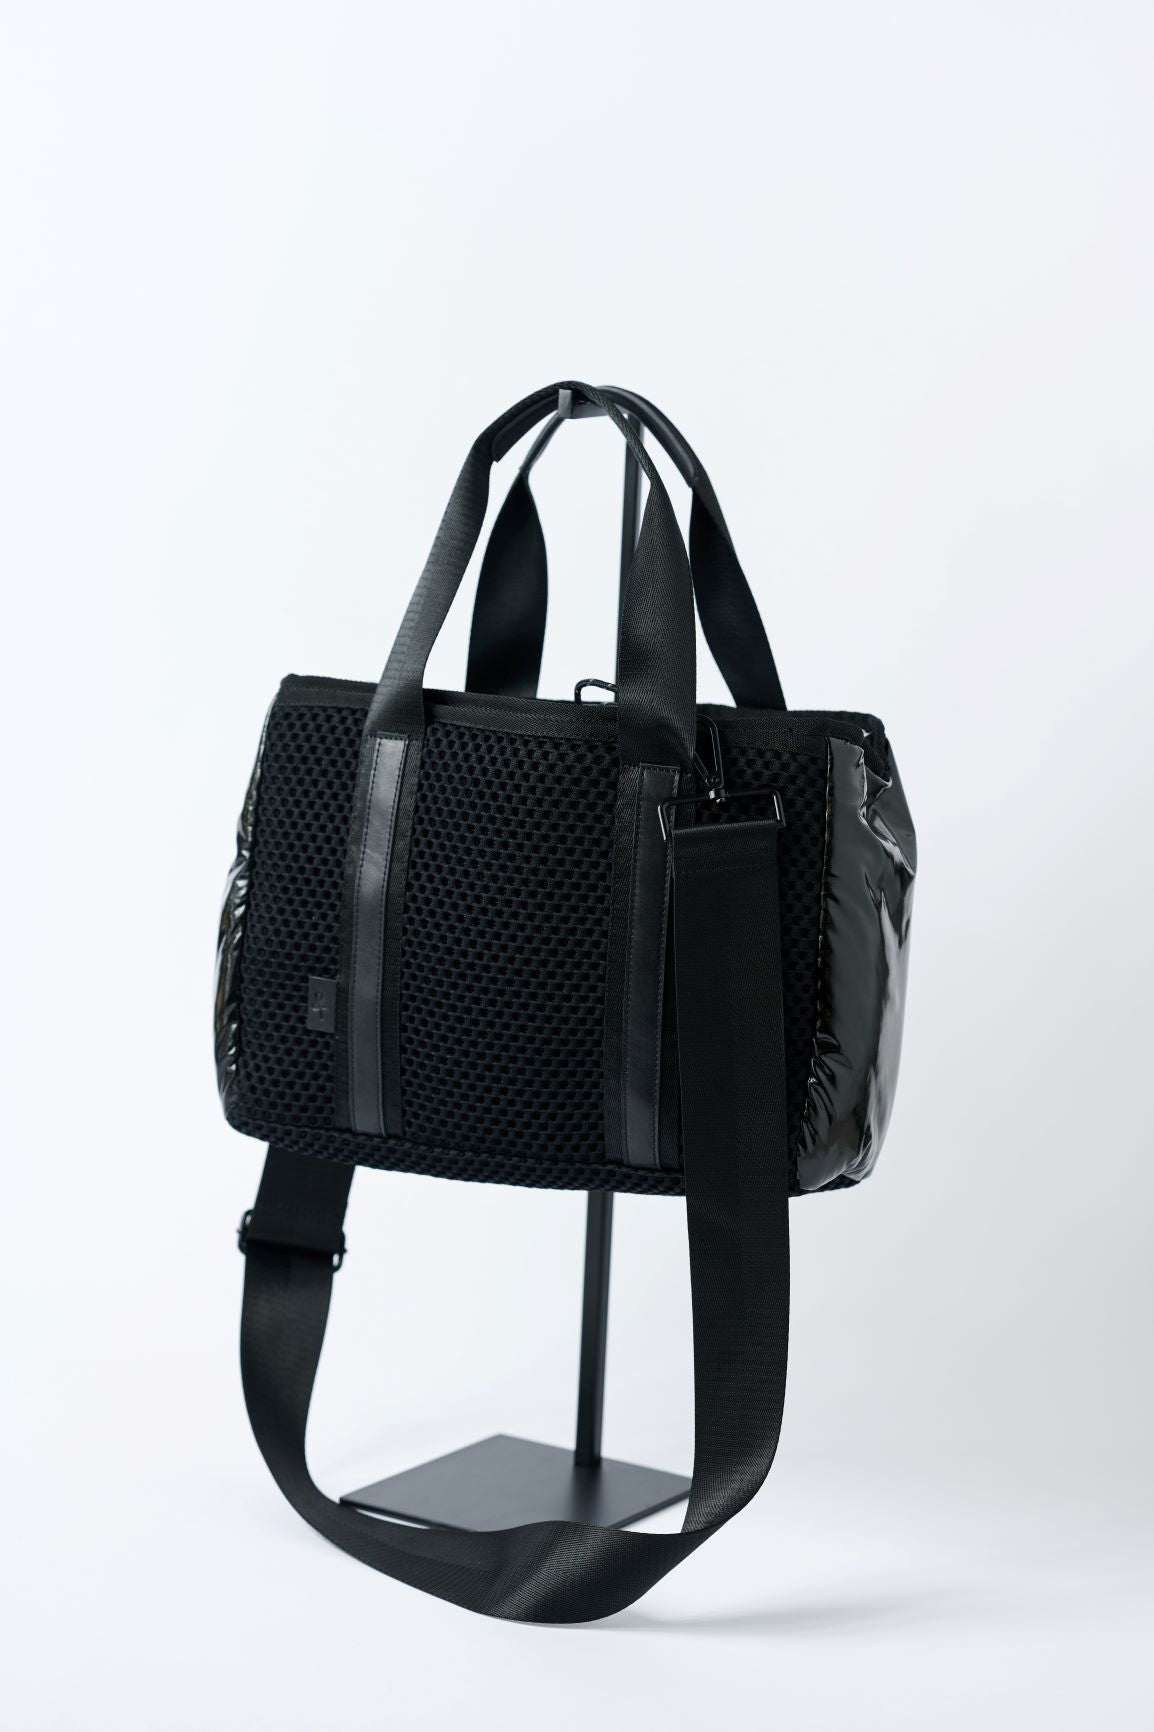 Small black mesh tote with glossy black sides, shiny silver cinch top and crossbody strap.